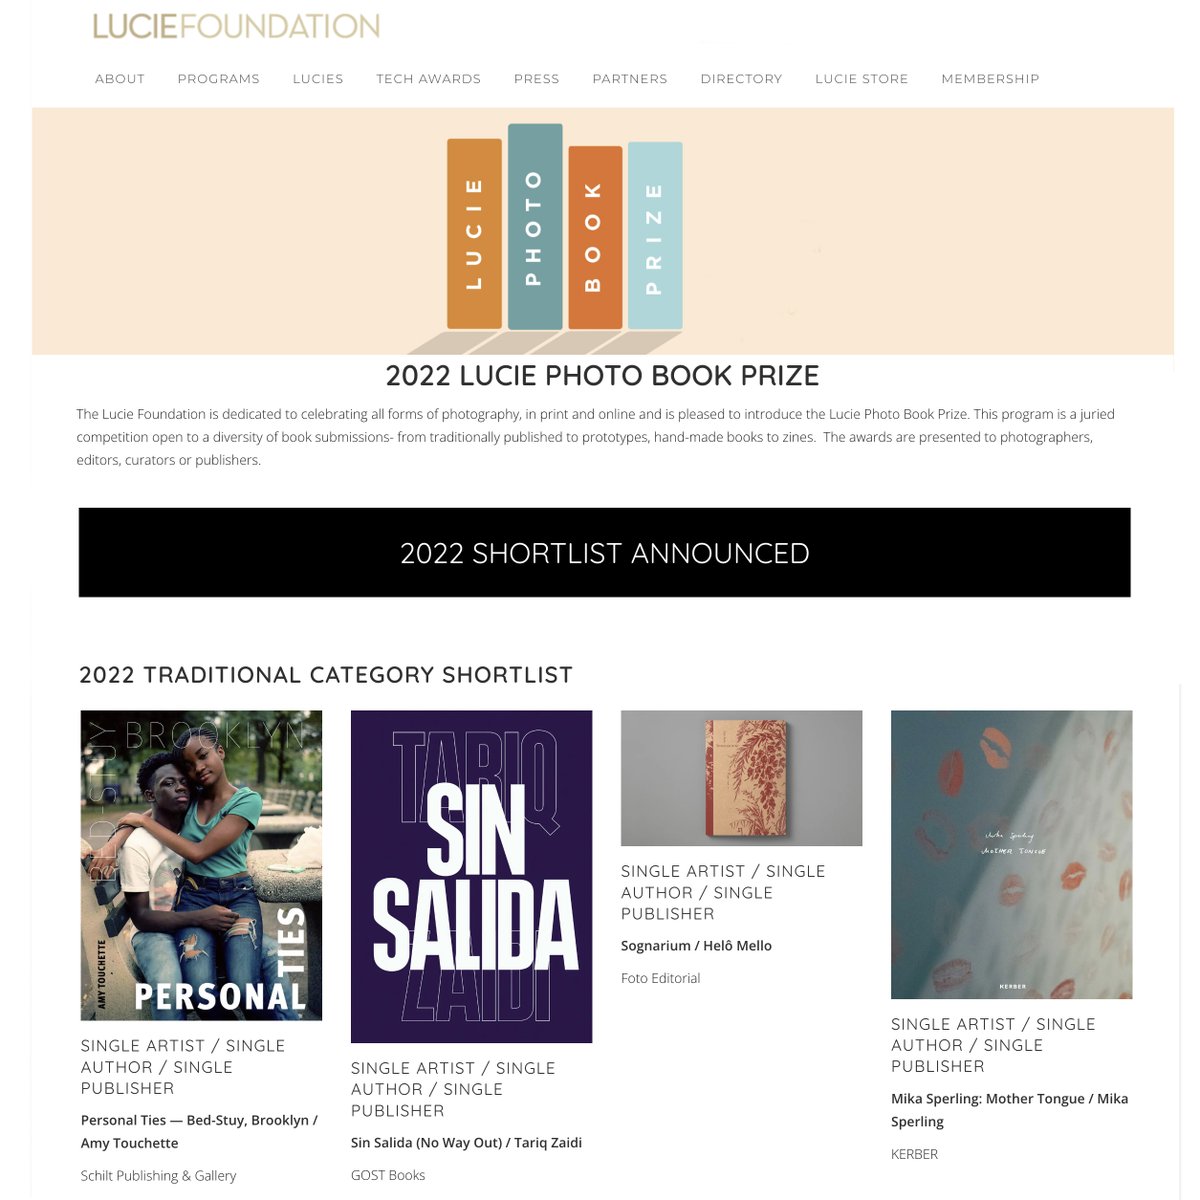 Very pleased to see both my books “Sapeurs, Ladies and Gentlemen of the Congo” #KehrerVerlag and “Sin Salida” (No Way Out) @GOST_Books shortlisted for the 2022 Lucie Photo Book Prize @luciefoundation